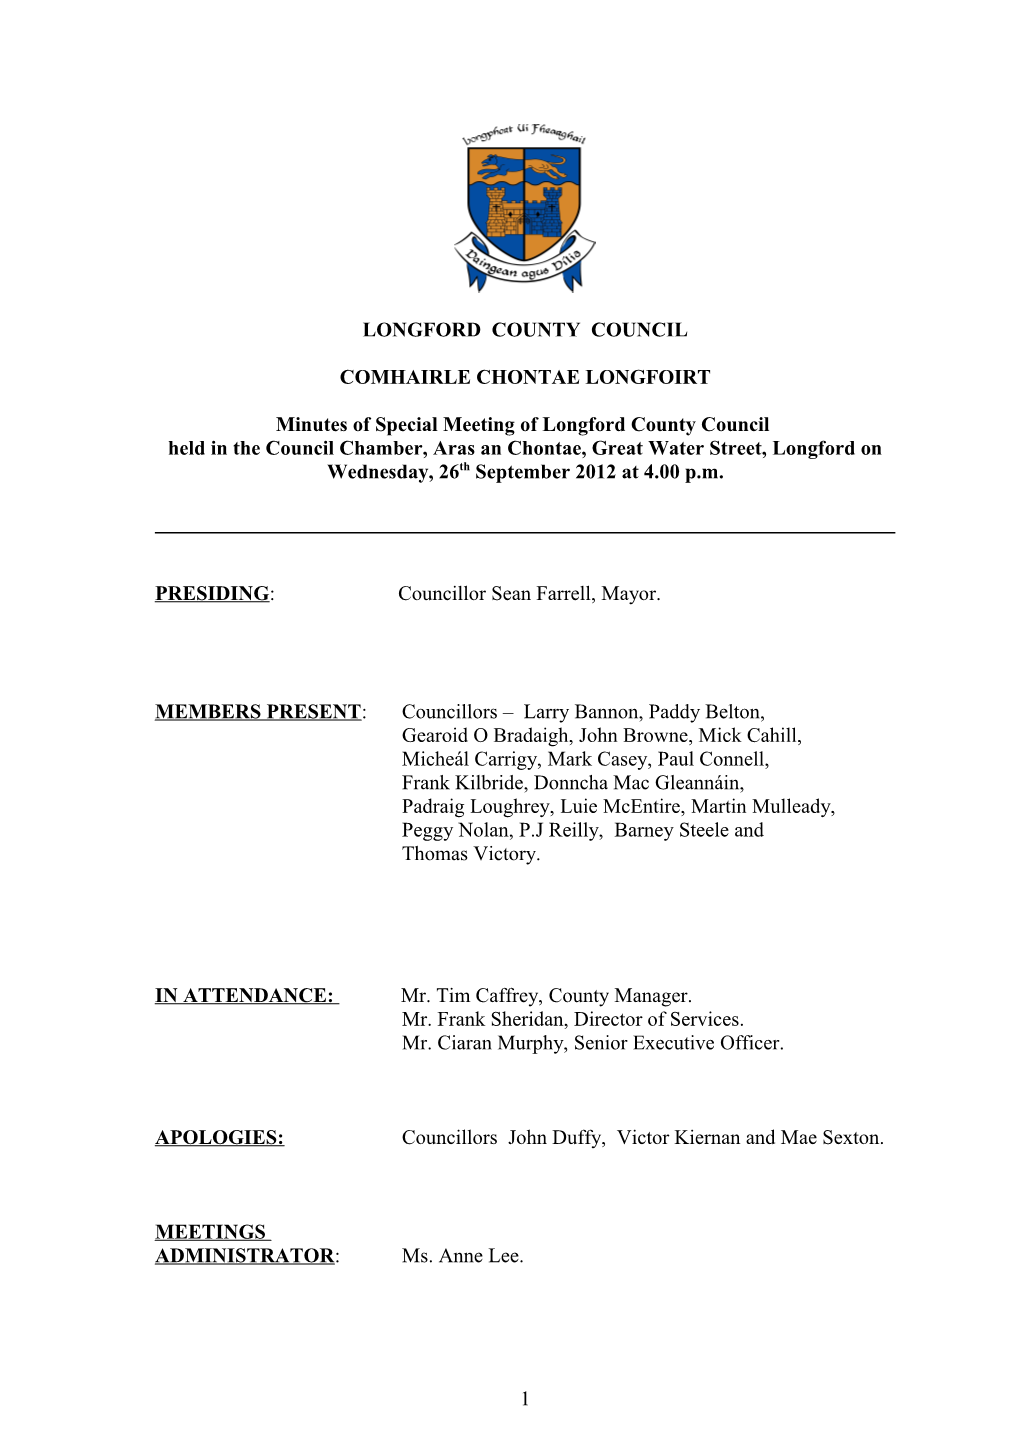 Minutes of Special Meeting of Longford County Council